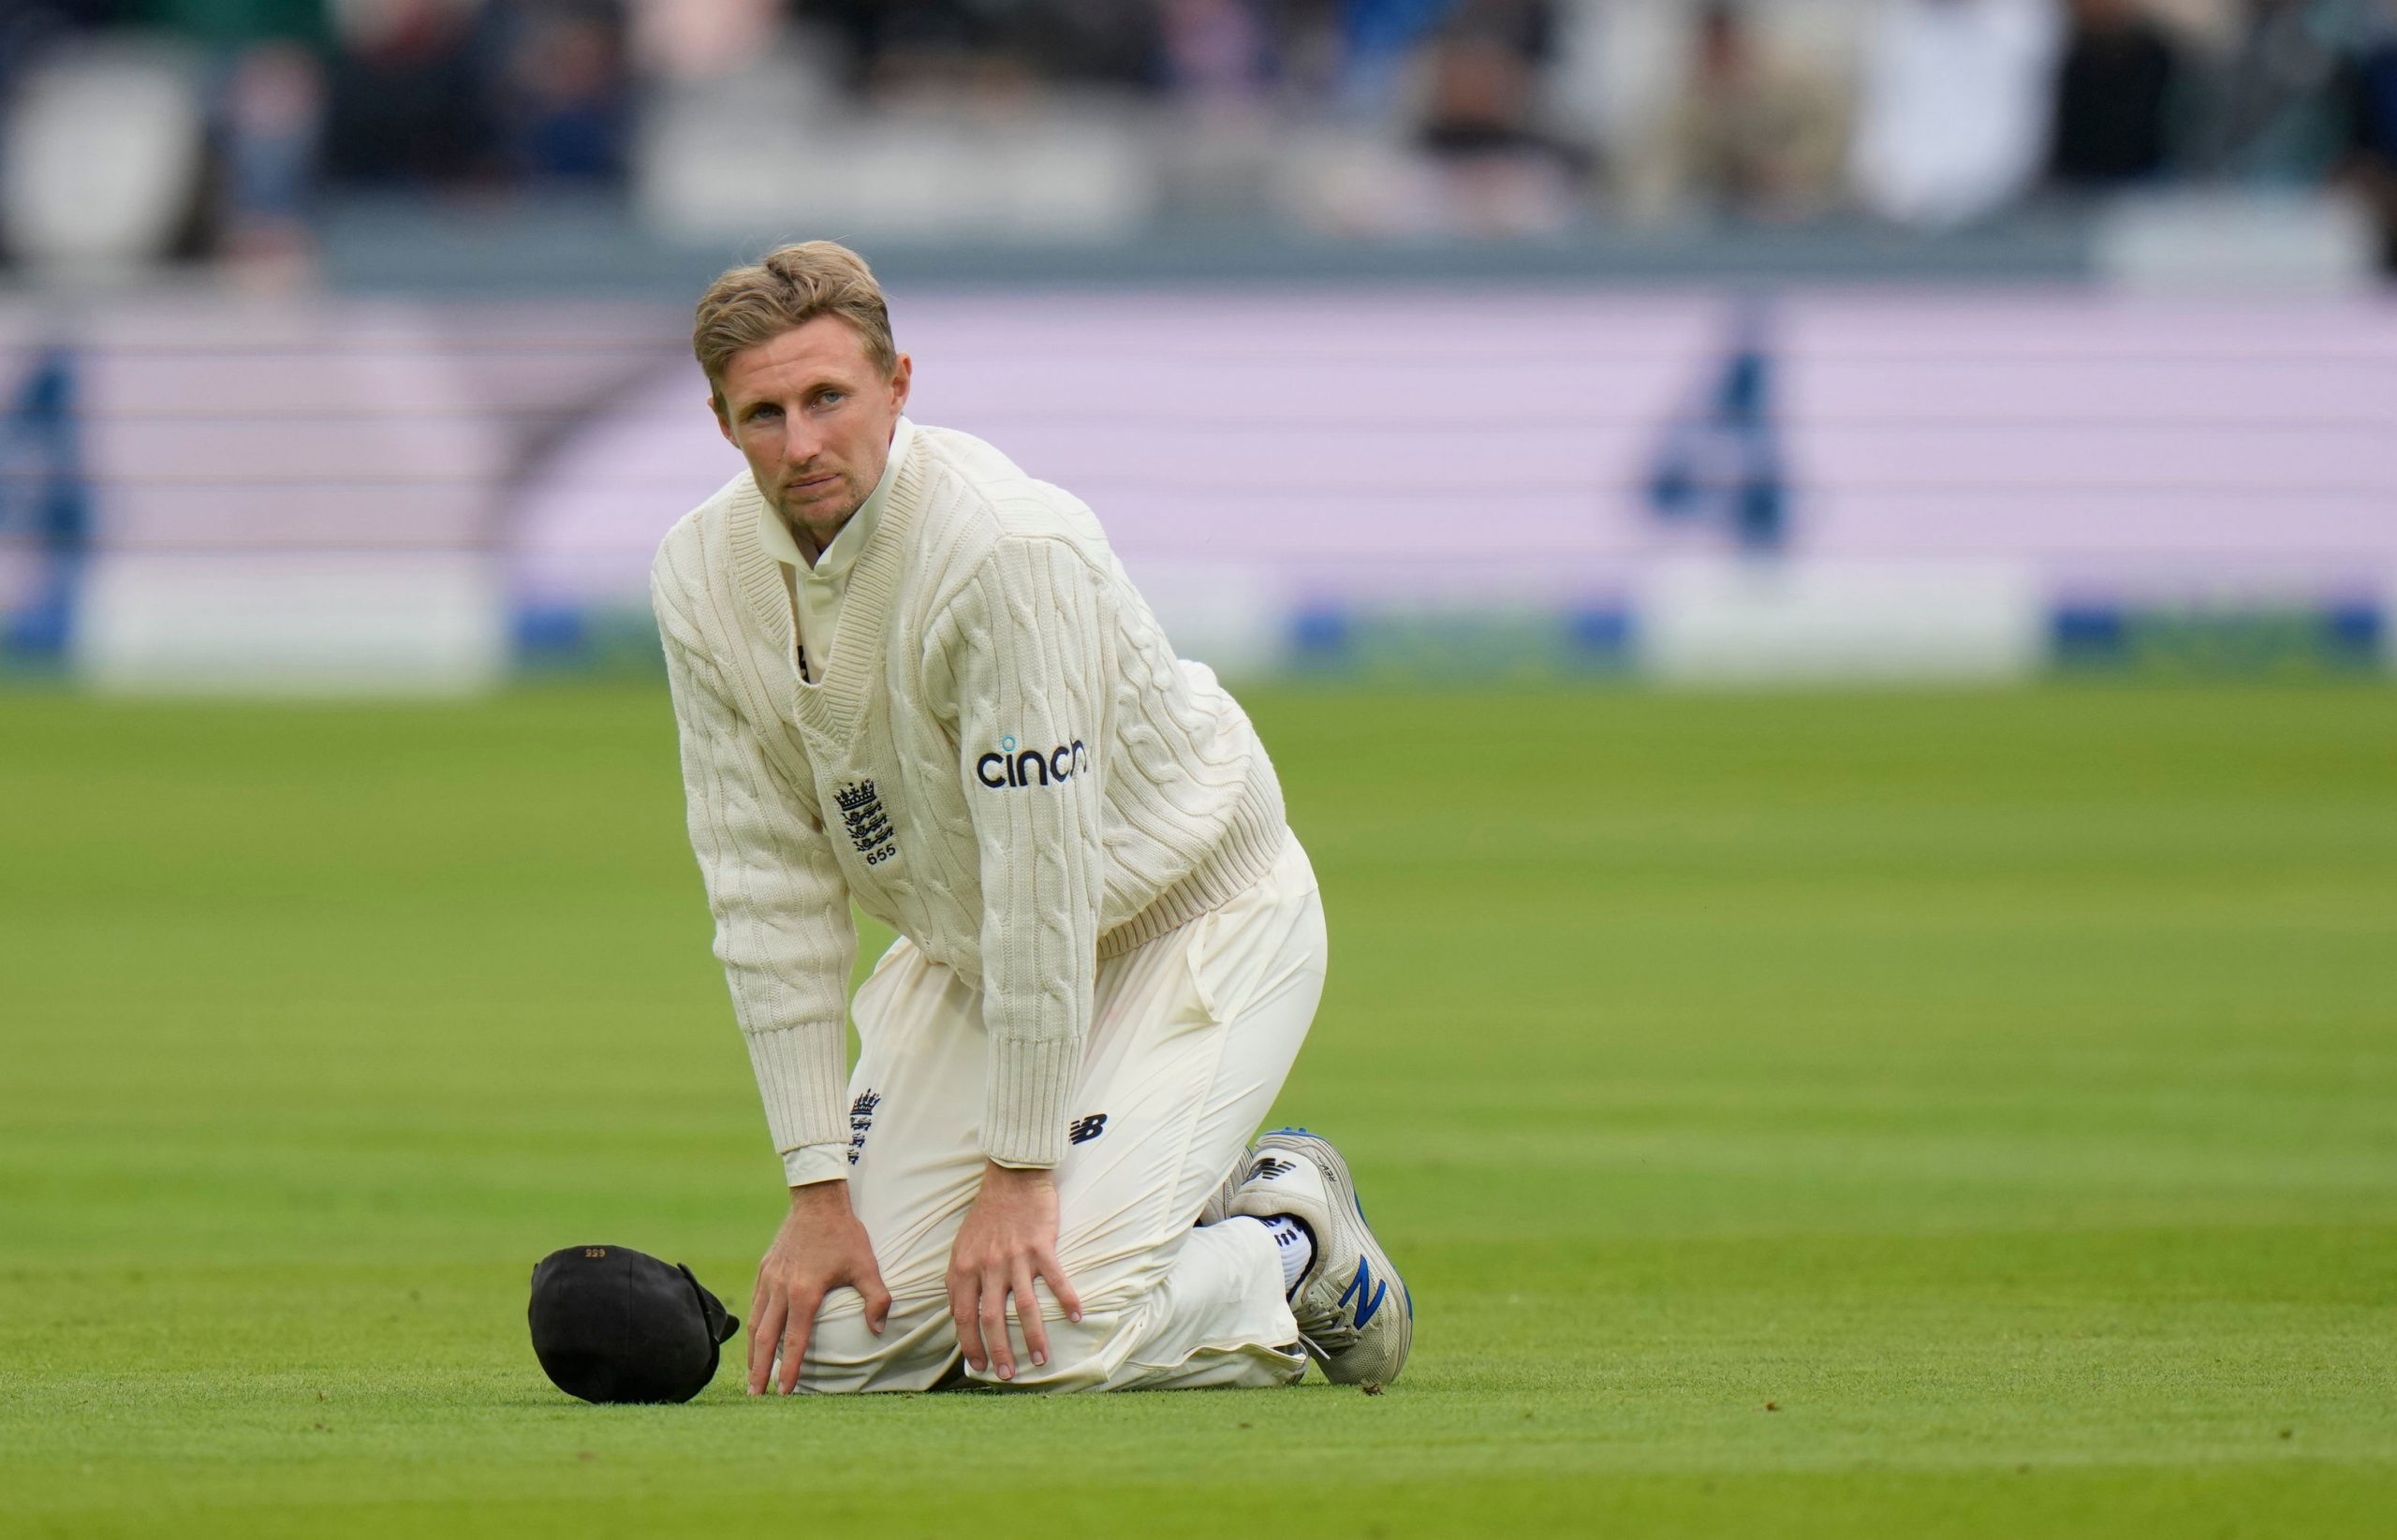 Yorkshire racism row has fractured our game, torn lives apart: Joe Root